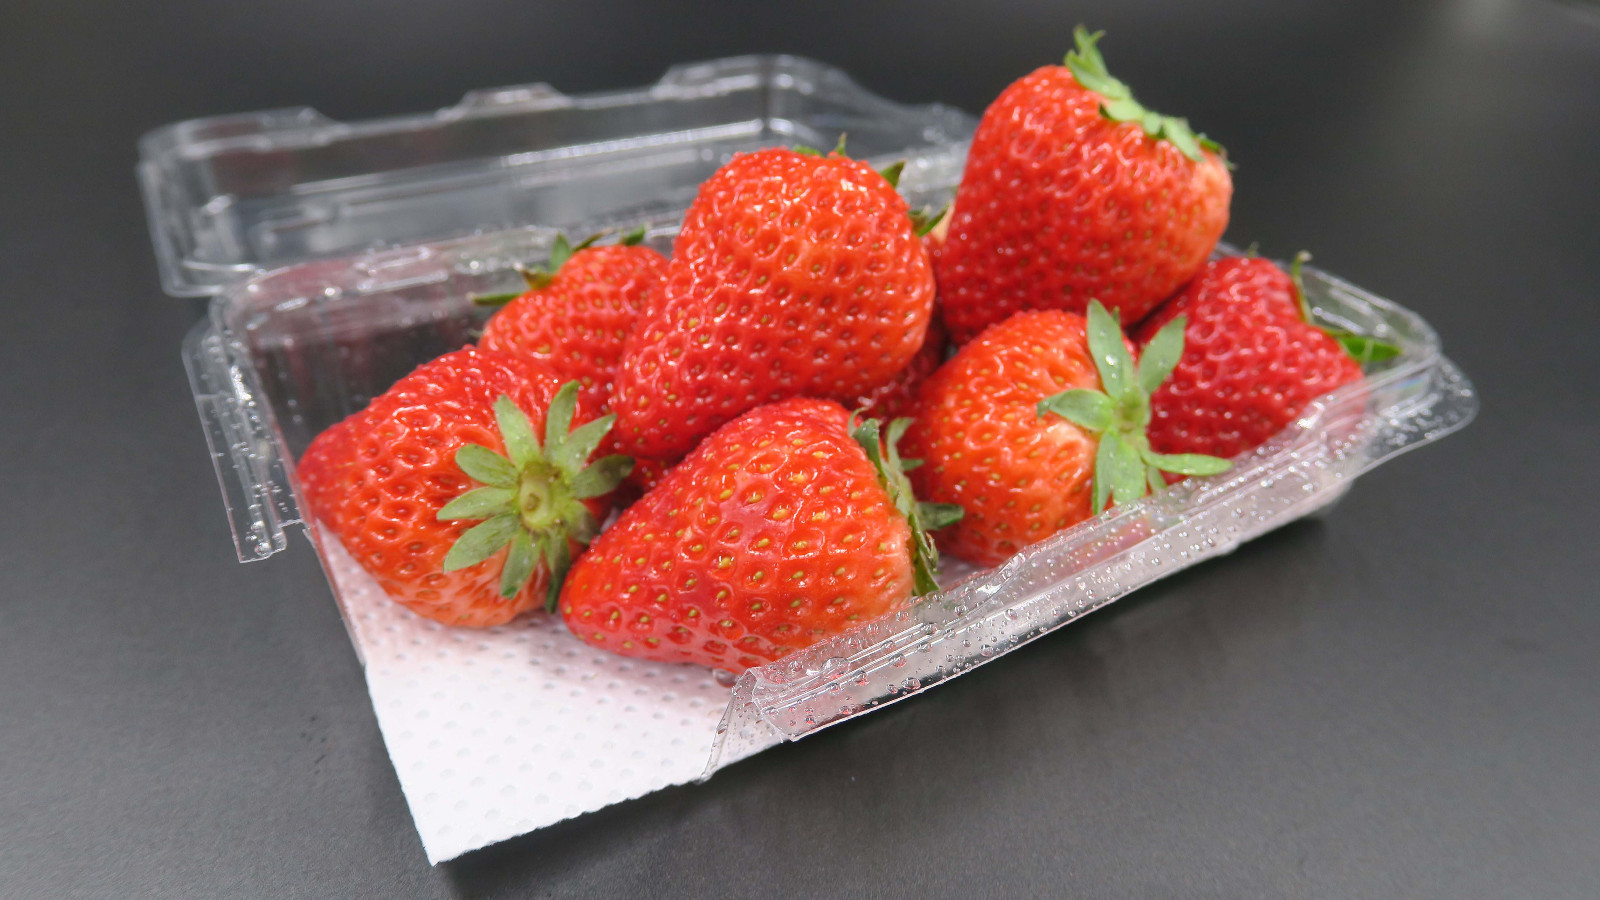 Demi absorbent super absorbent pads maintaining great product presentation for fruit-6